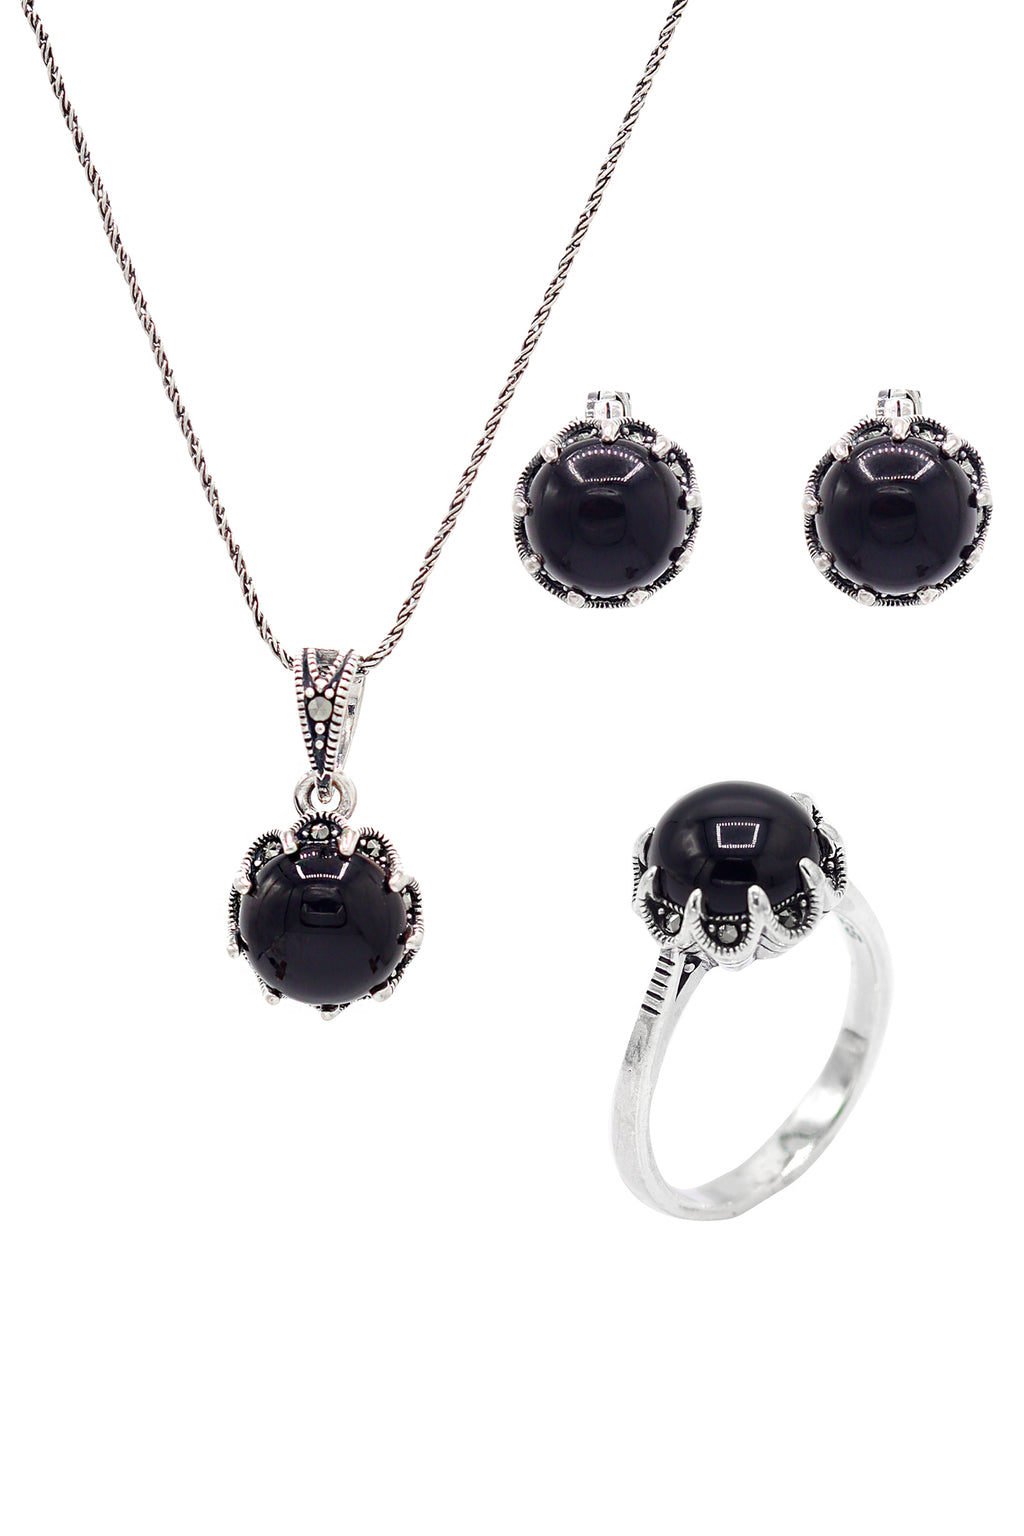 Round Model Silver Triple Jewelry Set With Onyx (NG201021952)